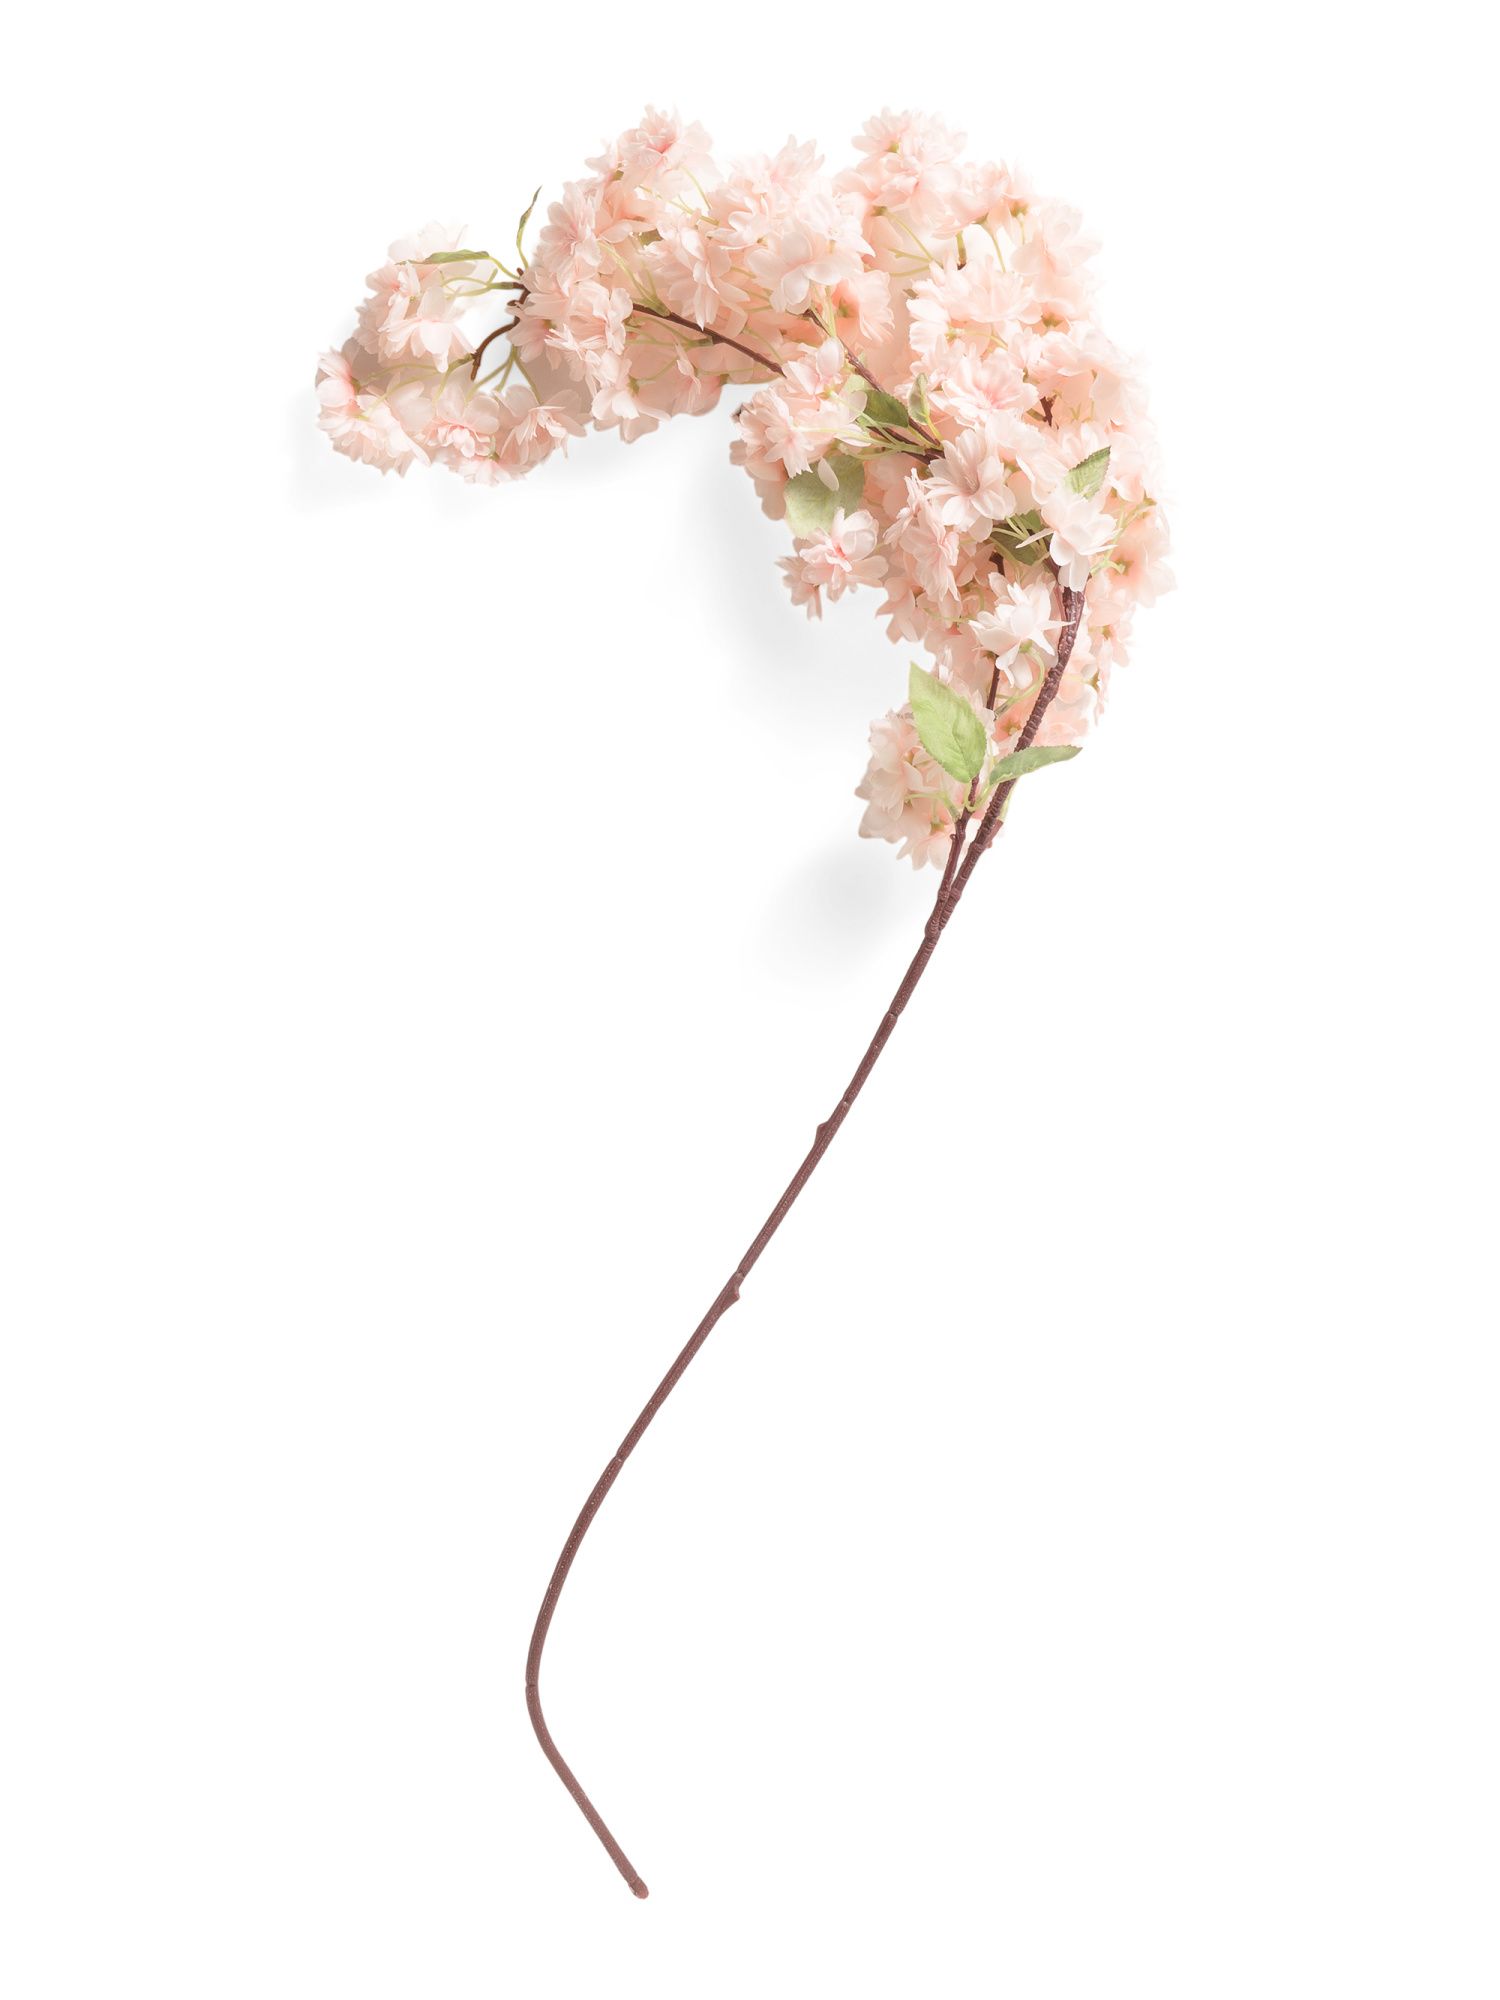 AFLORAL
							
							40in  Cherry Blossom Branch
						
						
							

	
		
						
							$16.... | Marshalls